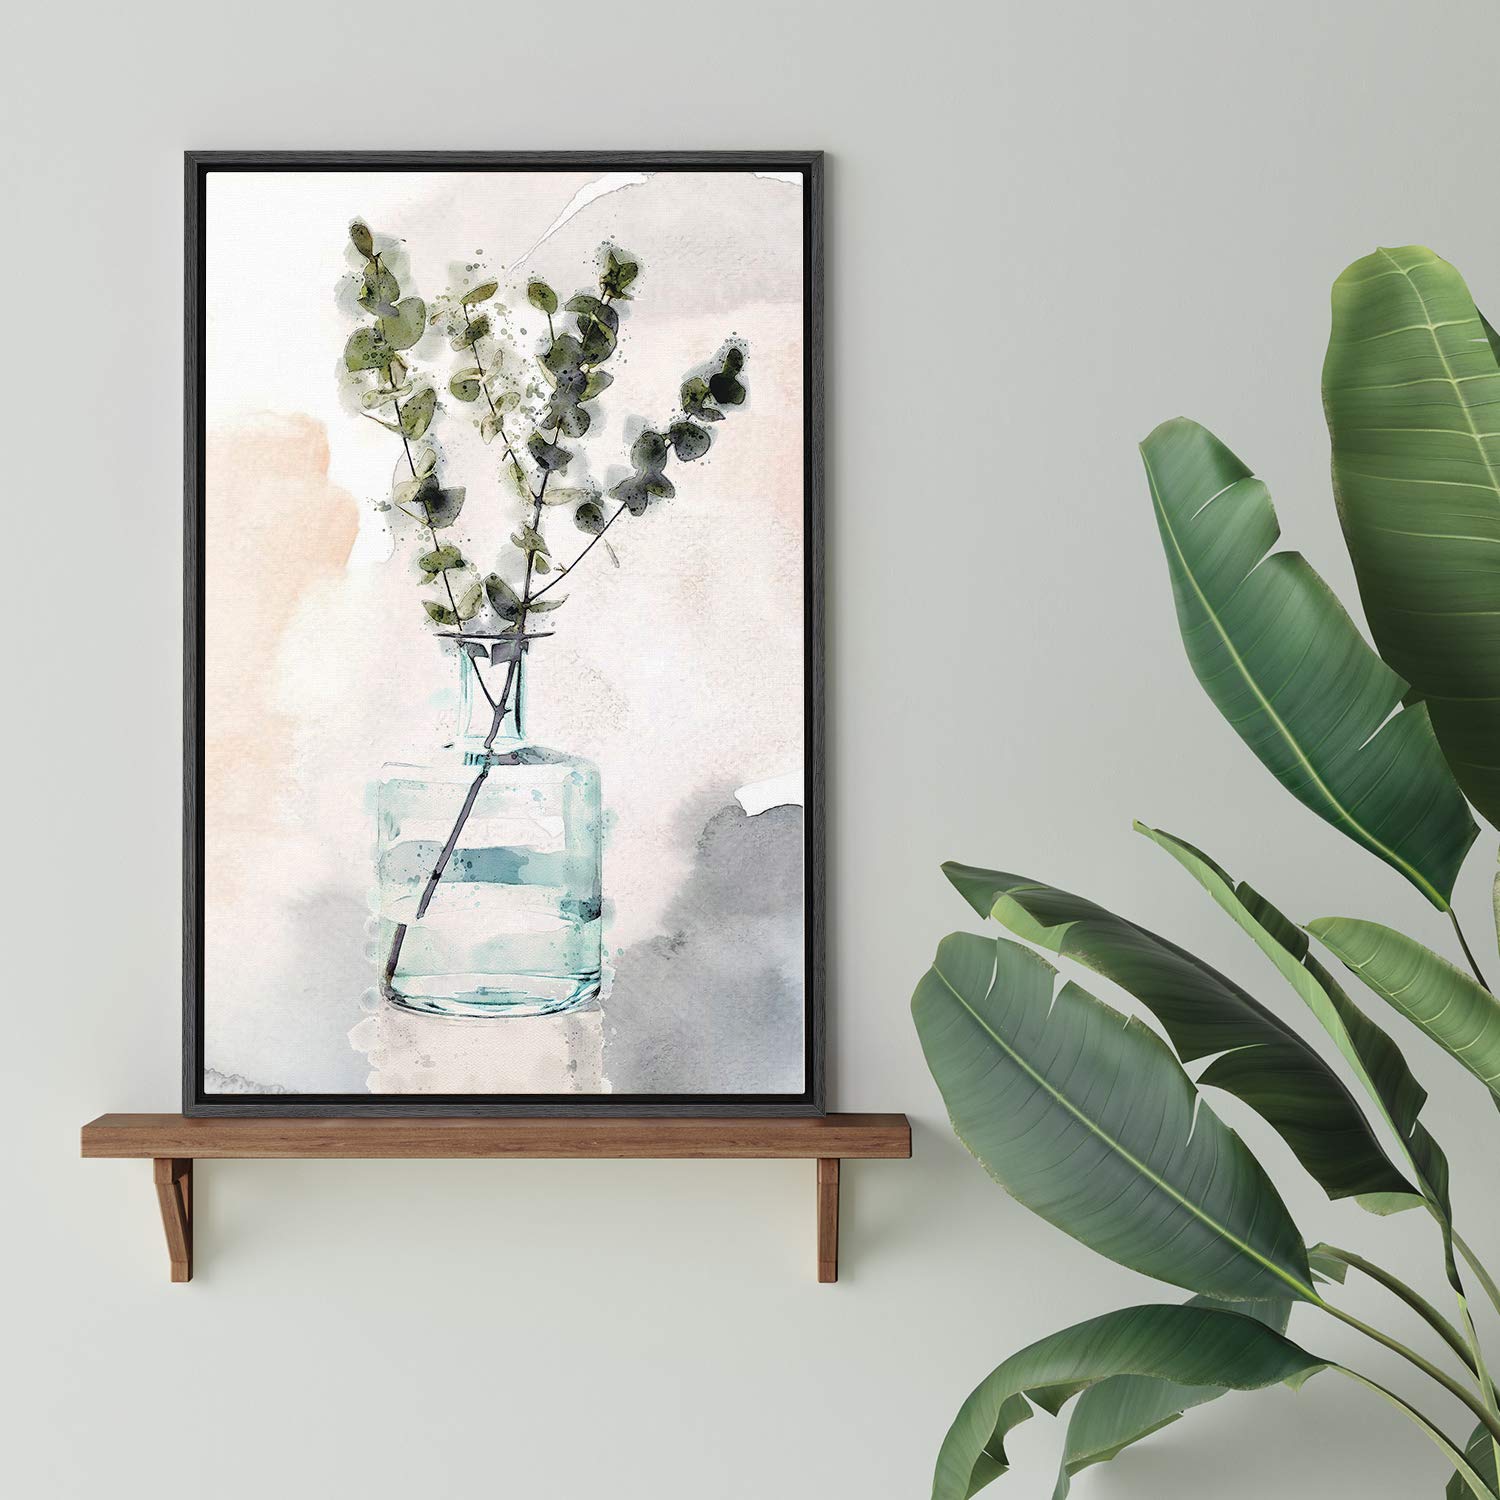 wall26 Framed Canvas Wall Art Dark Green Eucalyptus Tree in a Glass Vase Botanical Plants Watercolor Abstract Modern Relax/Calm Pastel for Living Room, Bedroom, Office - 24x36 inches - image 4 of 4